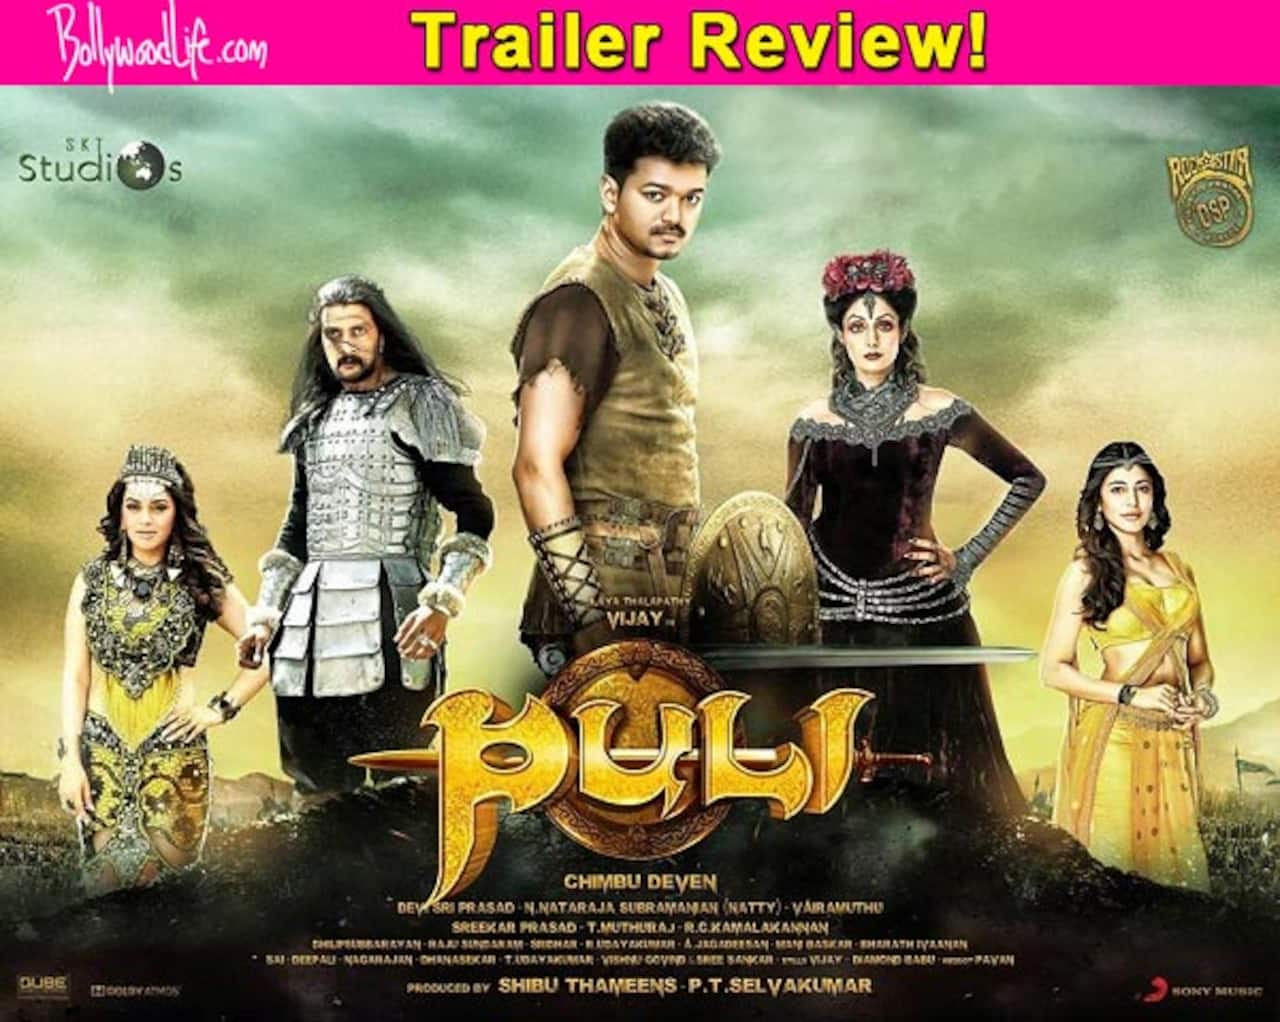 Puli trailer review: Vijay's kickass warrior avatar promises to be a treat for his fans!